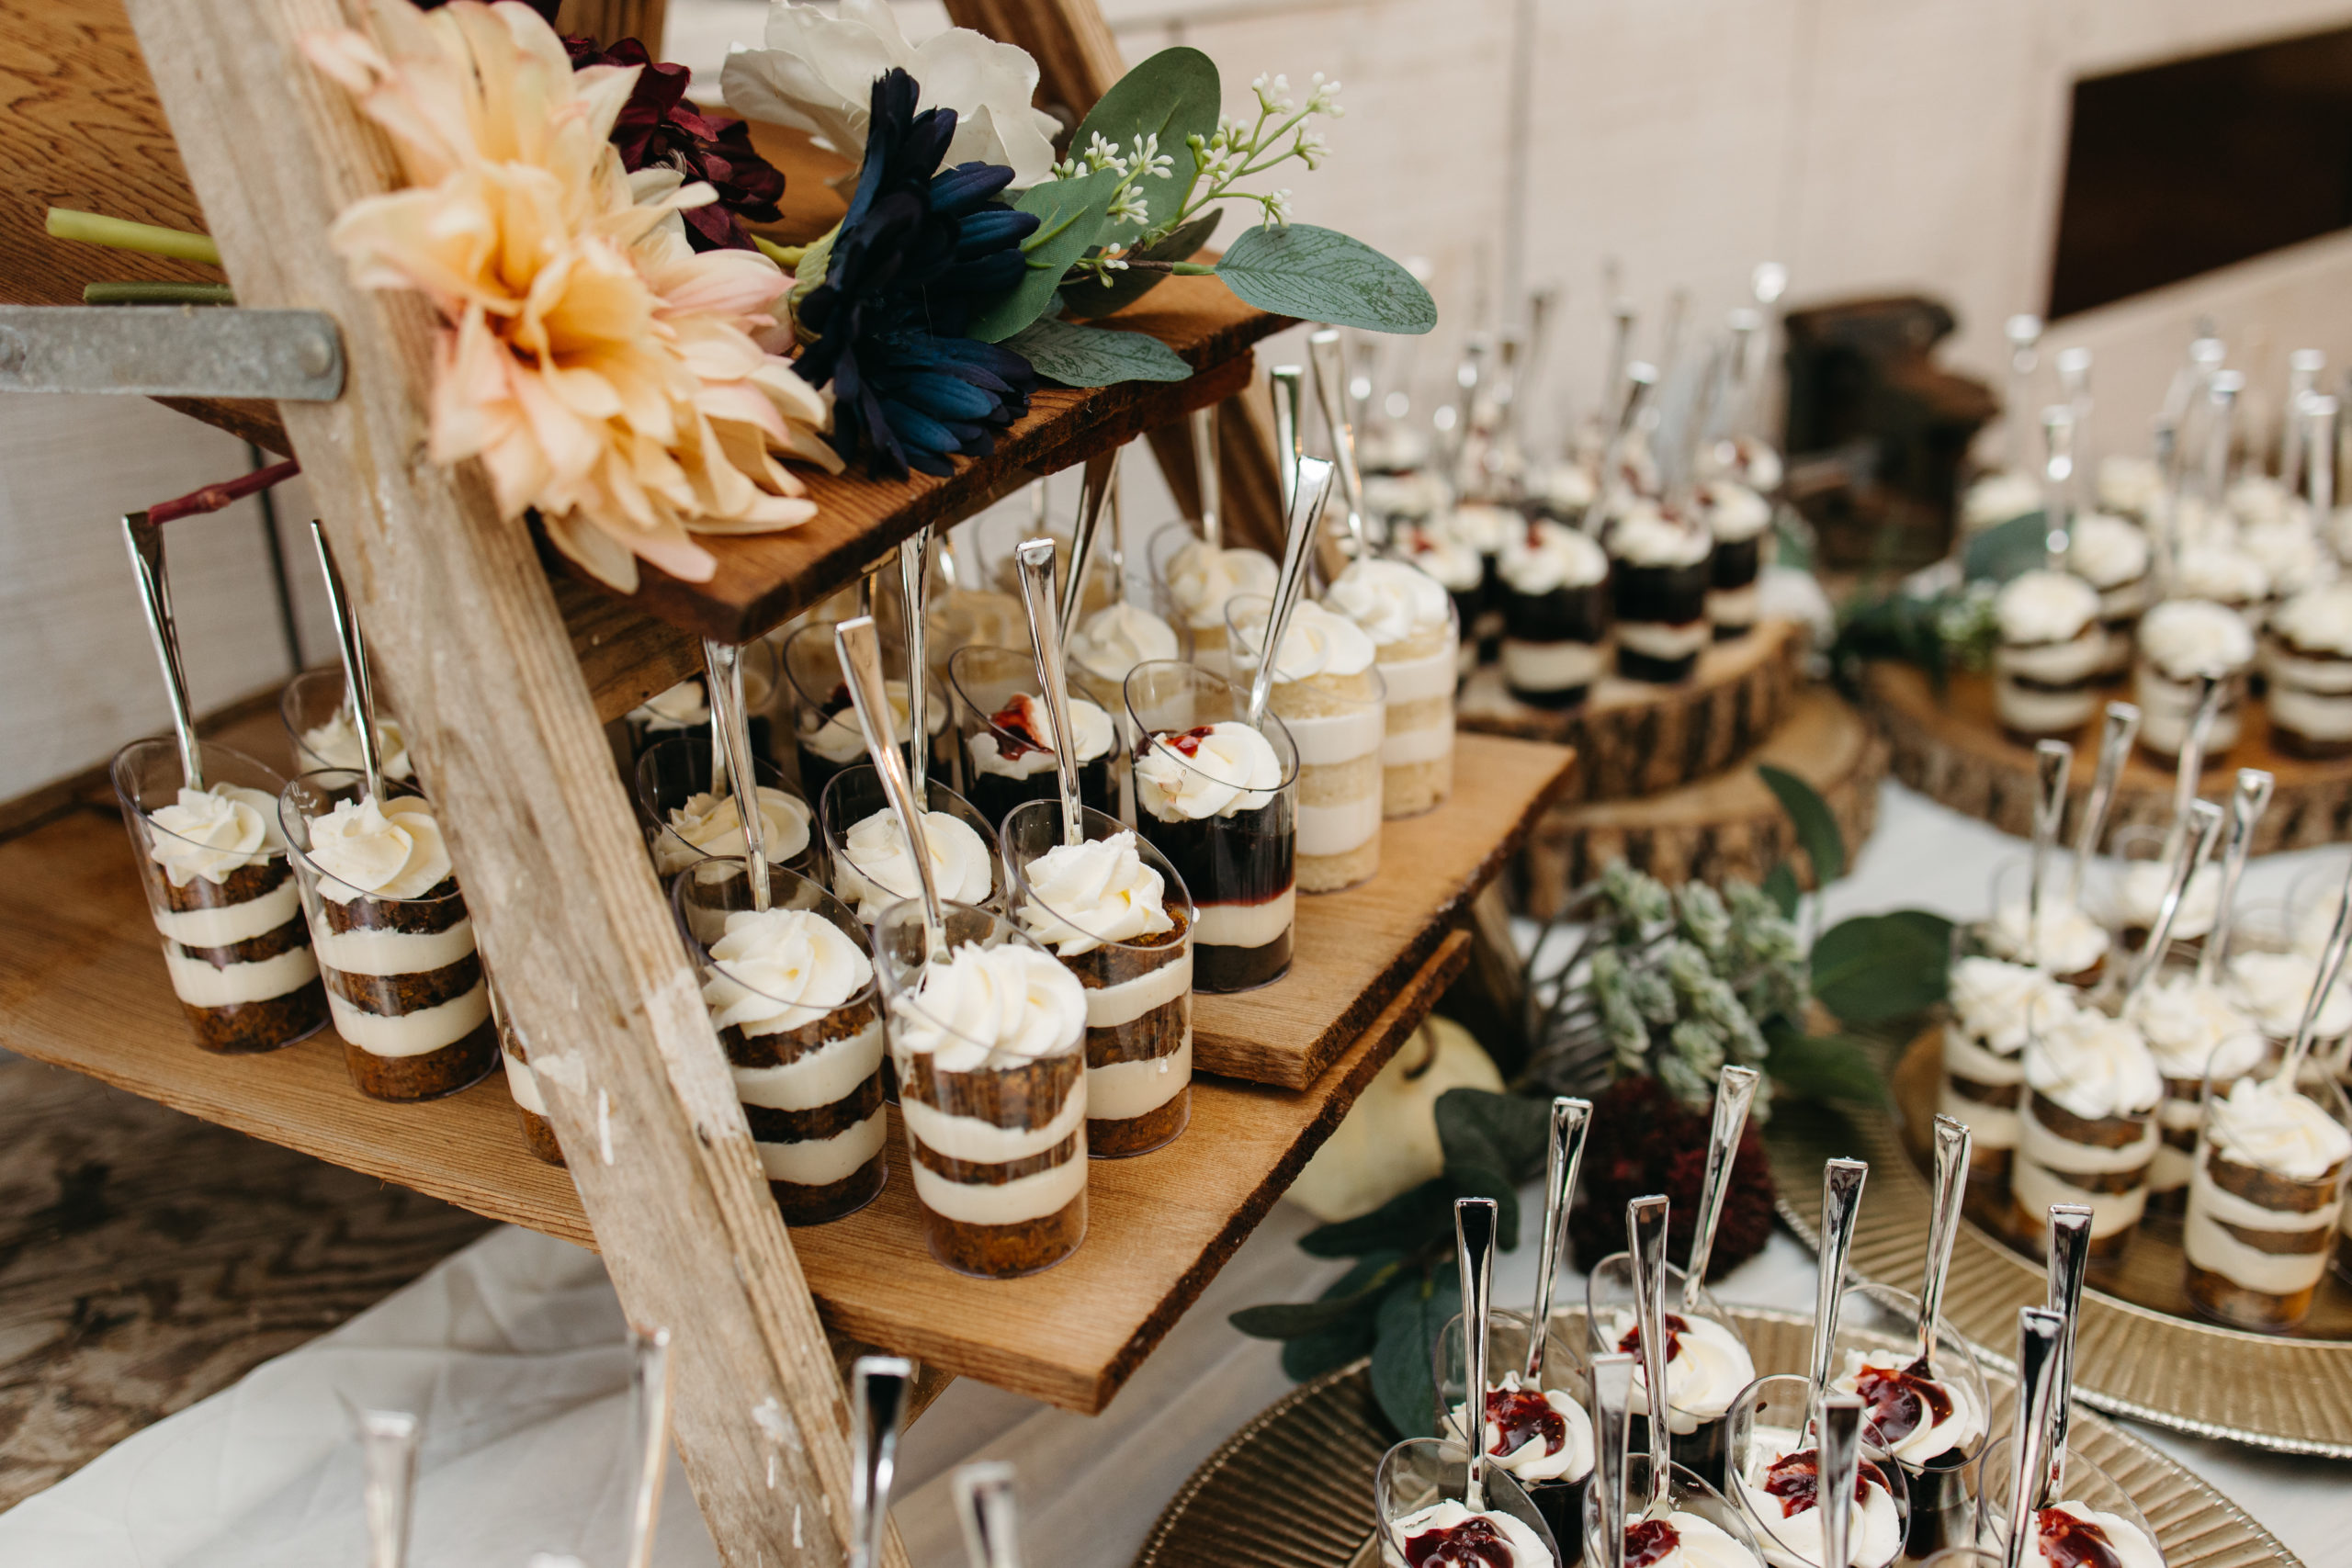 Dessert table inspiration for wedding details I'd love to see